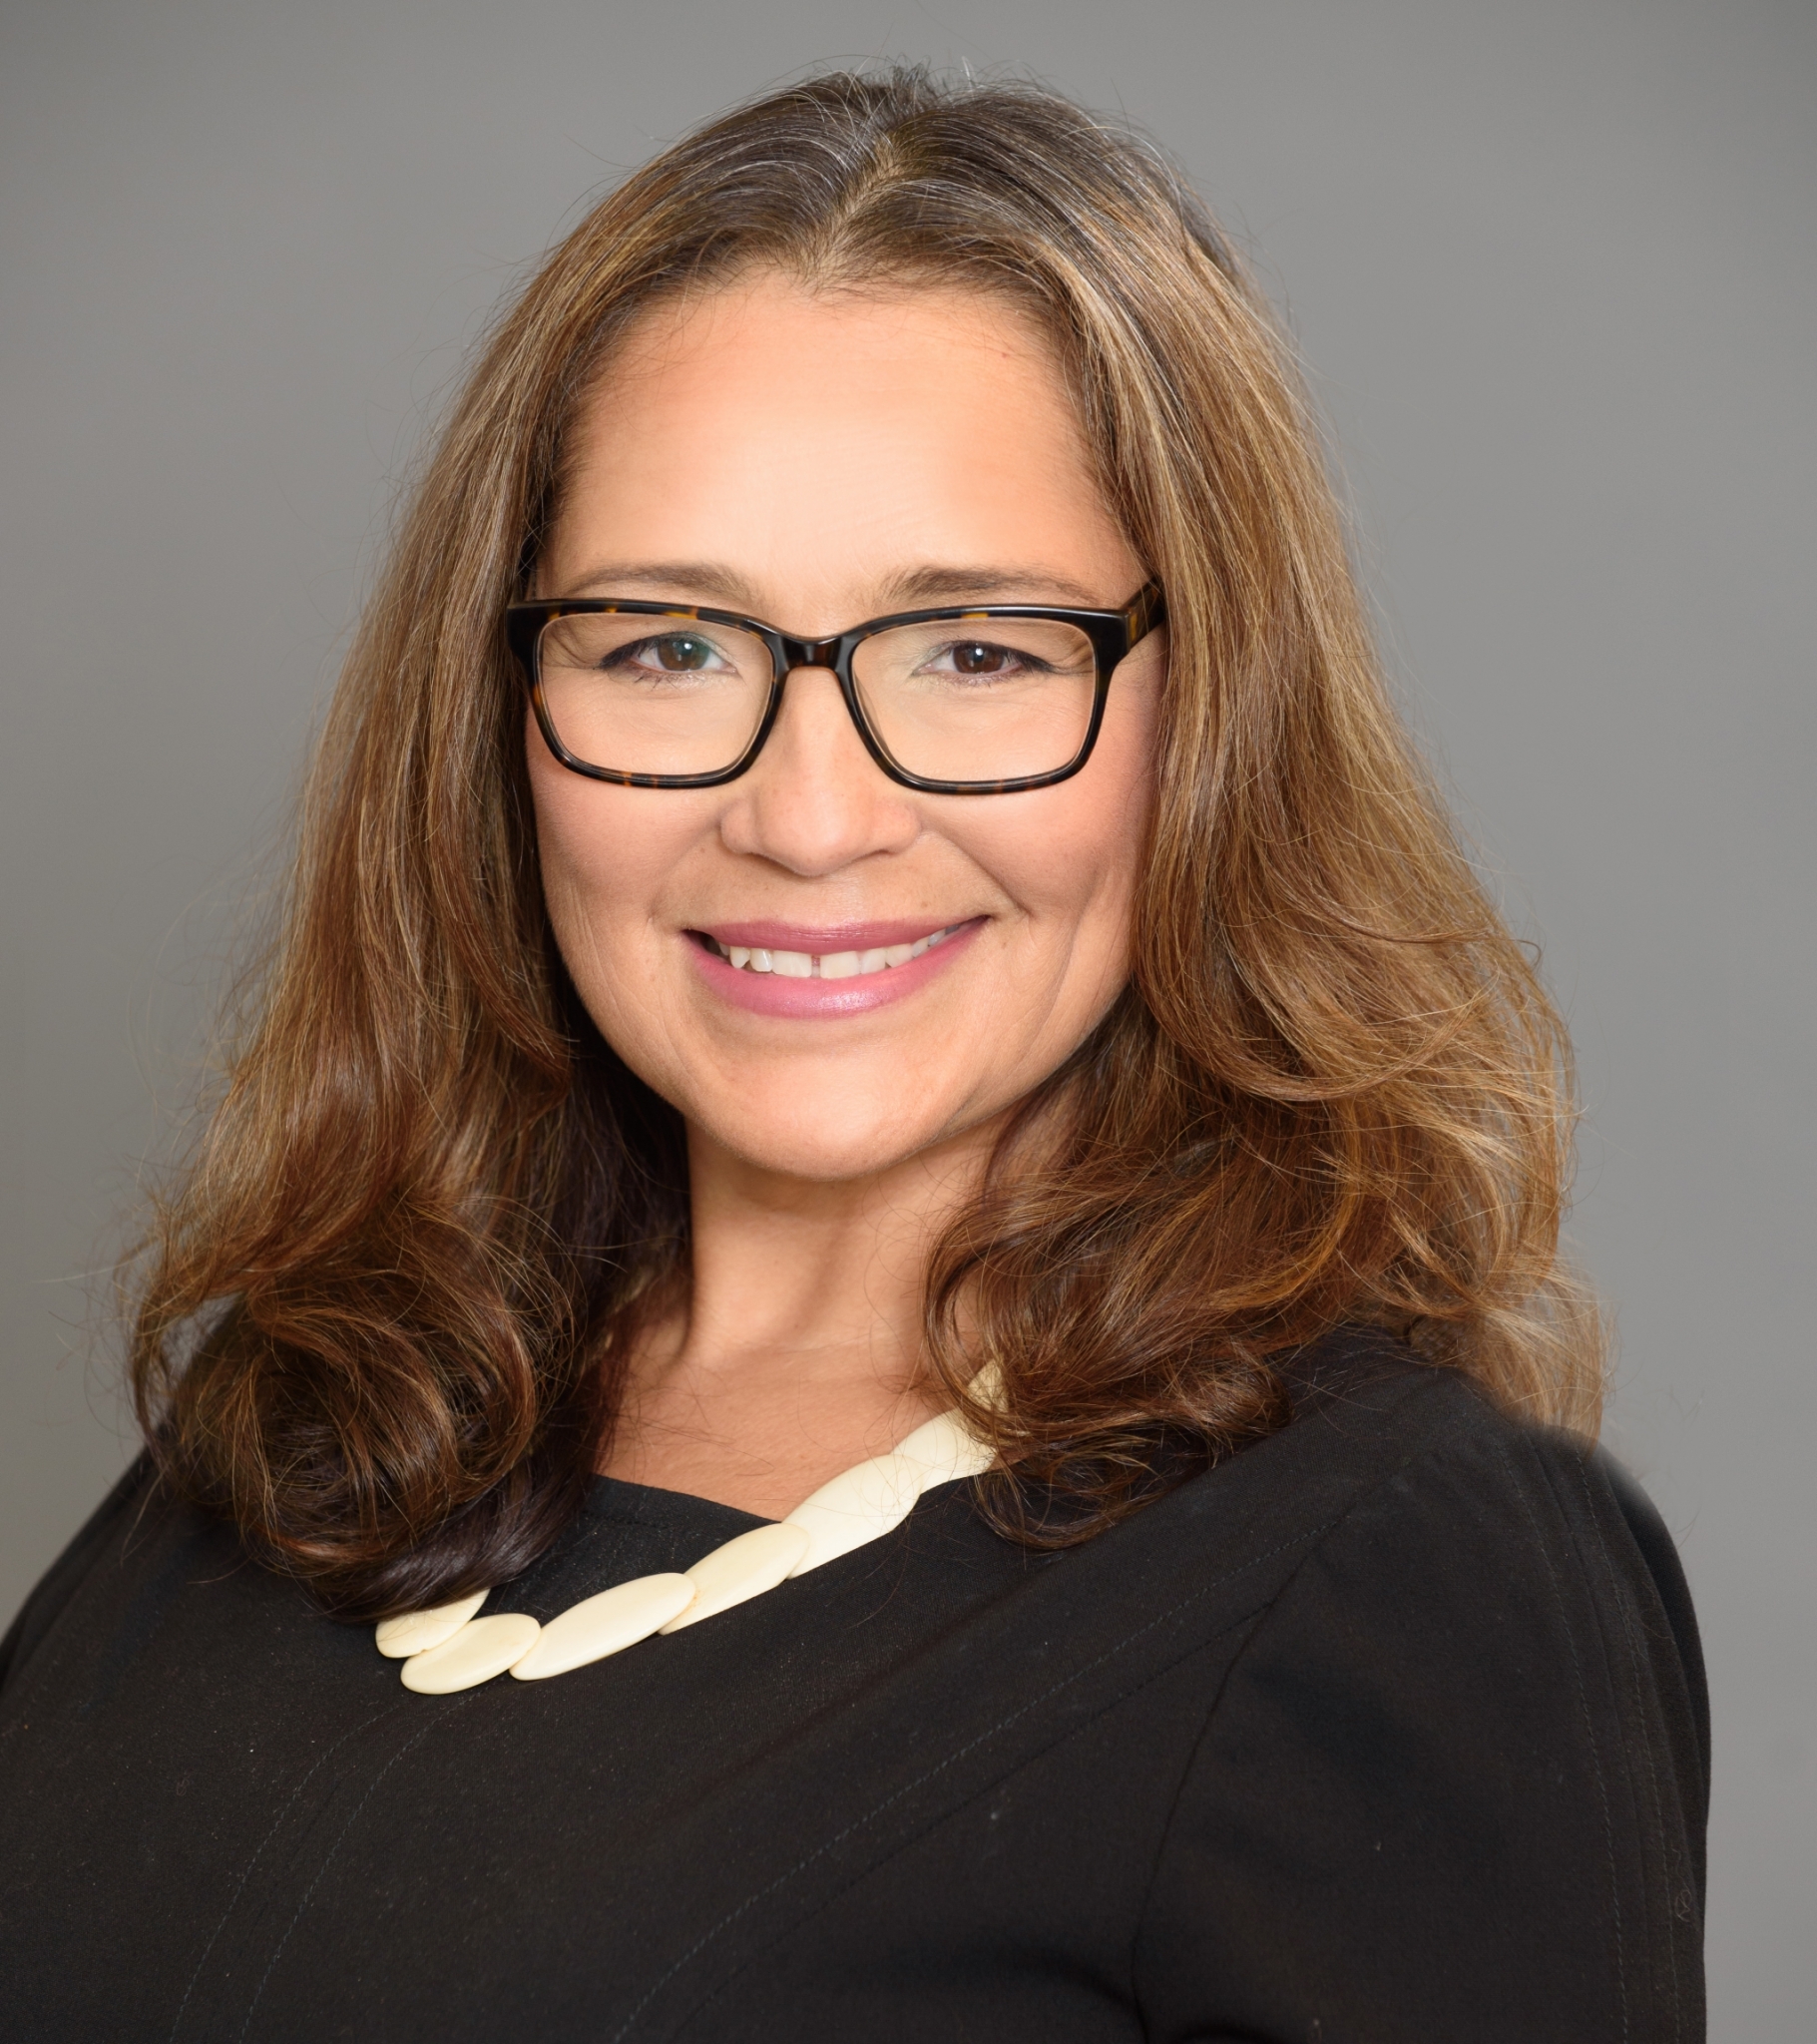 Headshot of Renee Aragon Dolese, Director of Marketing and Communications